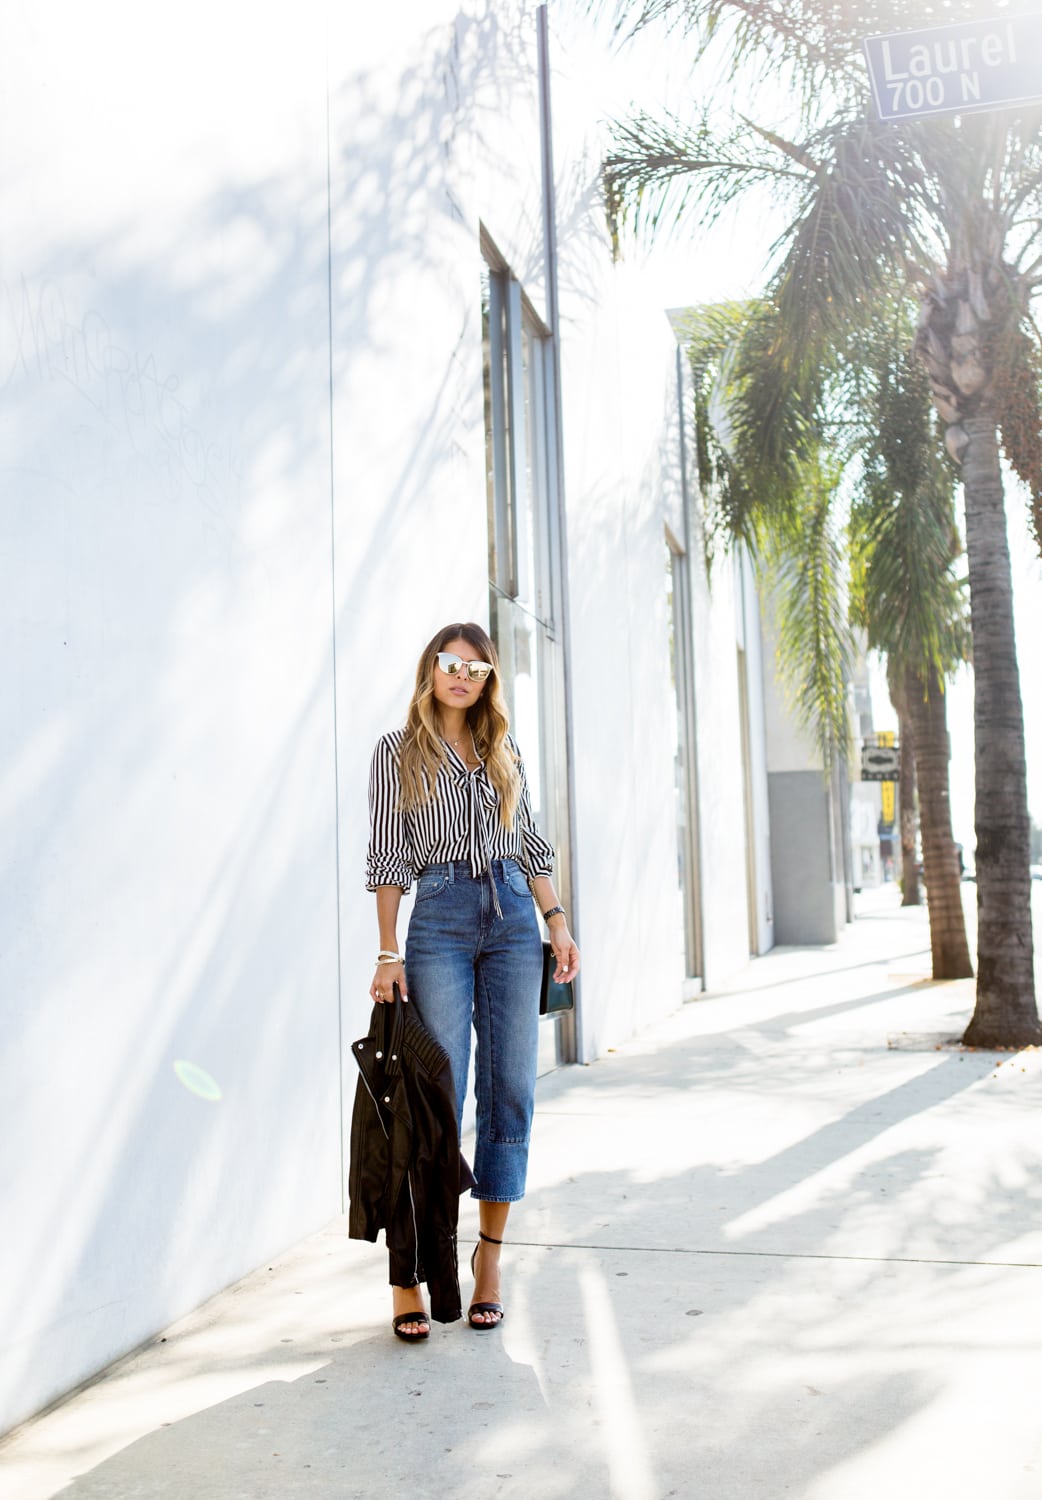 Transitioning your Wardrobe from Summer to Fall | The Girl From Panama @pamhetlinger